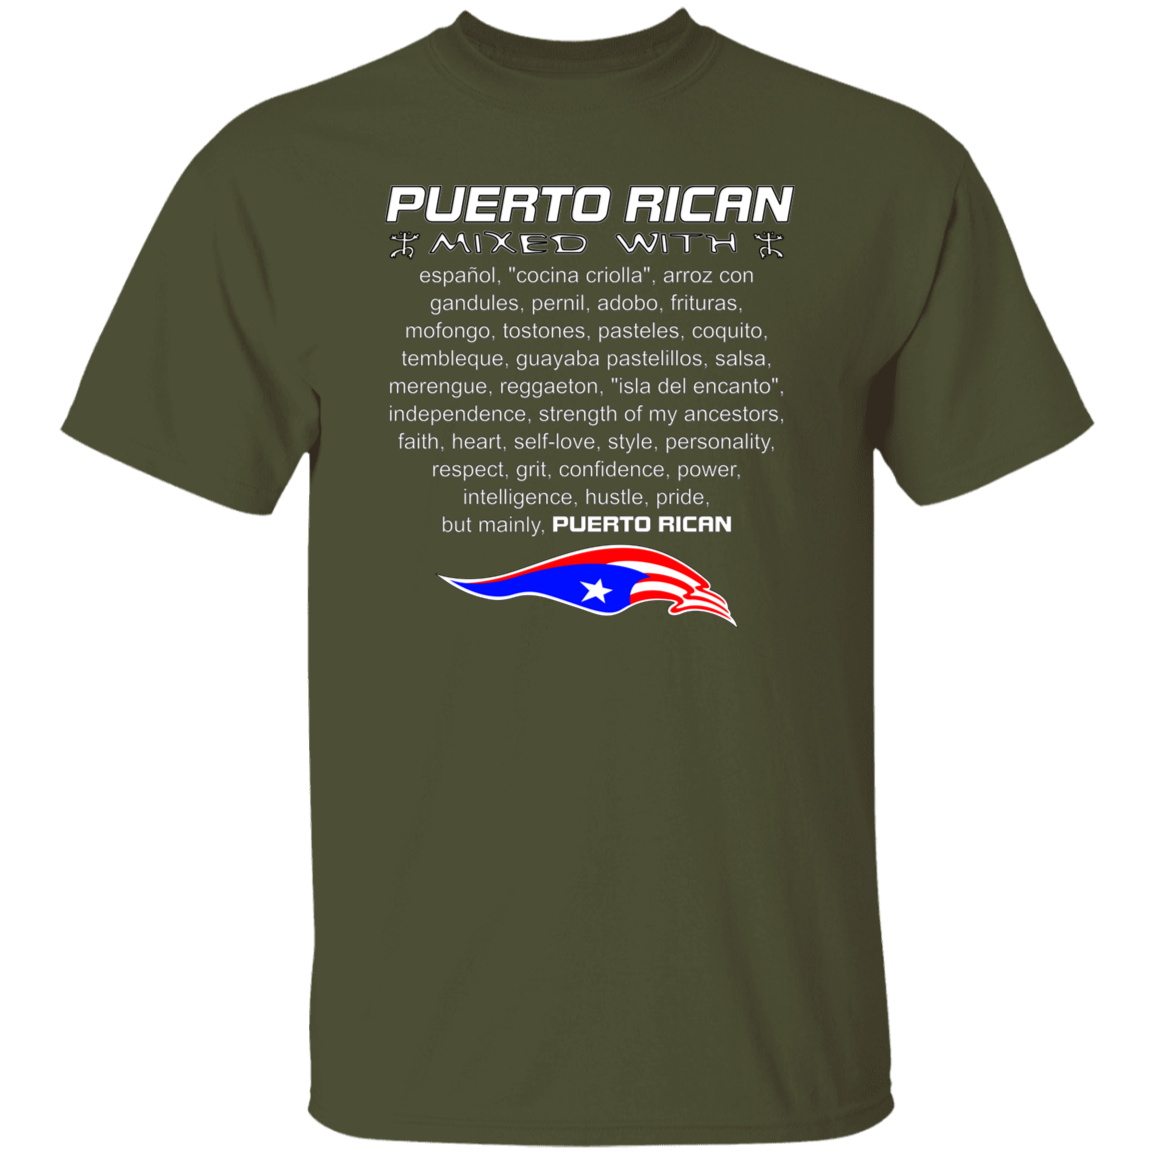 Puerto Rican Mixed With -  5.3 oz. T-Shirt